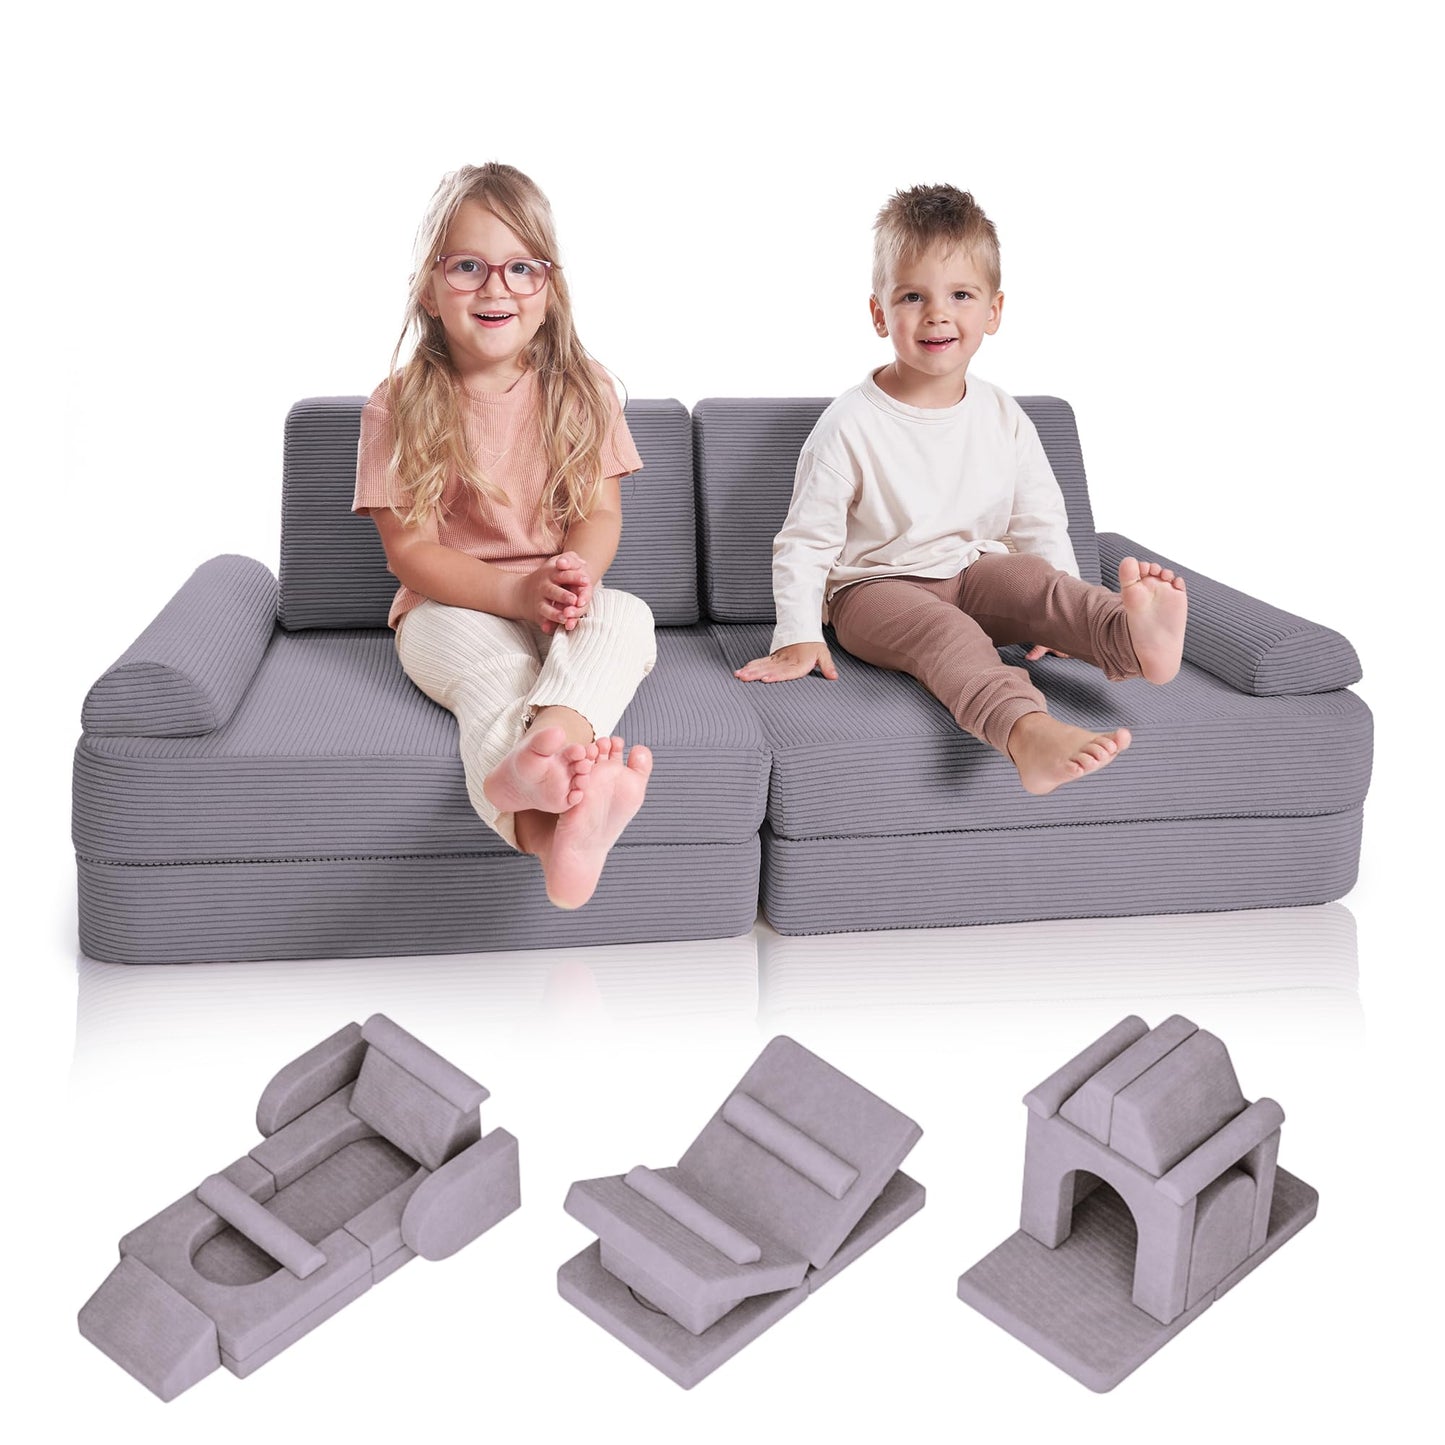 ZICOTO Modular Kids Play Couch for Fun Play Time or Comfy Lounging - The Perfect Toddler Sofa to Boost Creativity and Easily Build Magical Forts and More in Your Playroom/Nursery